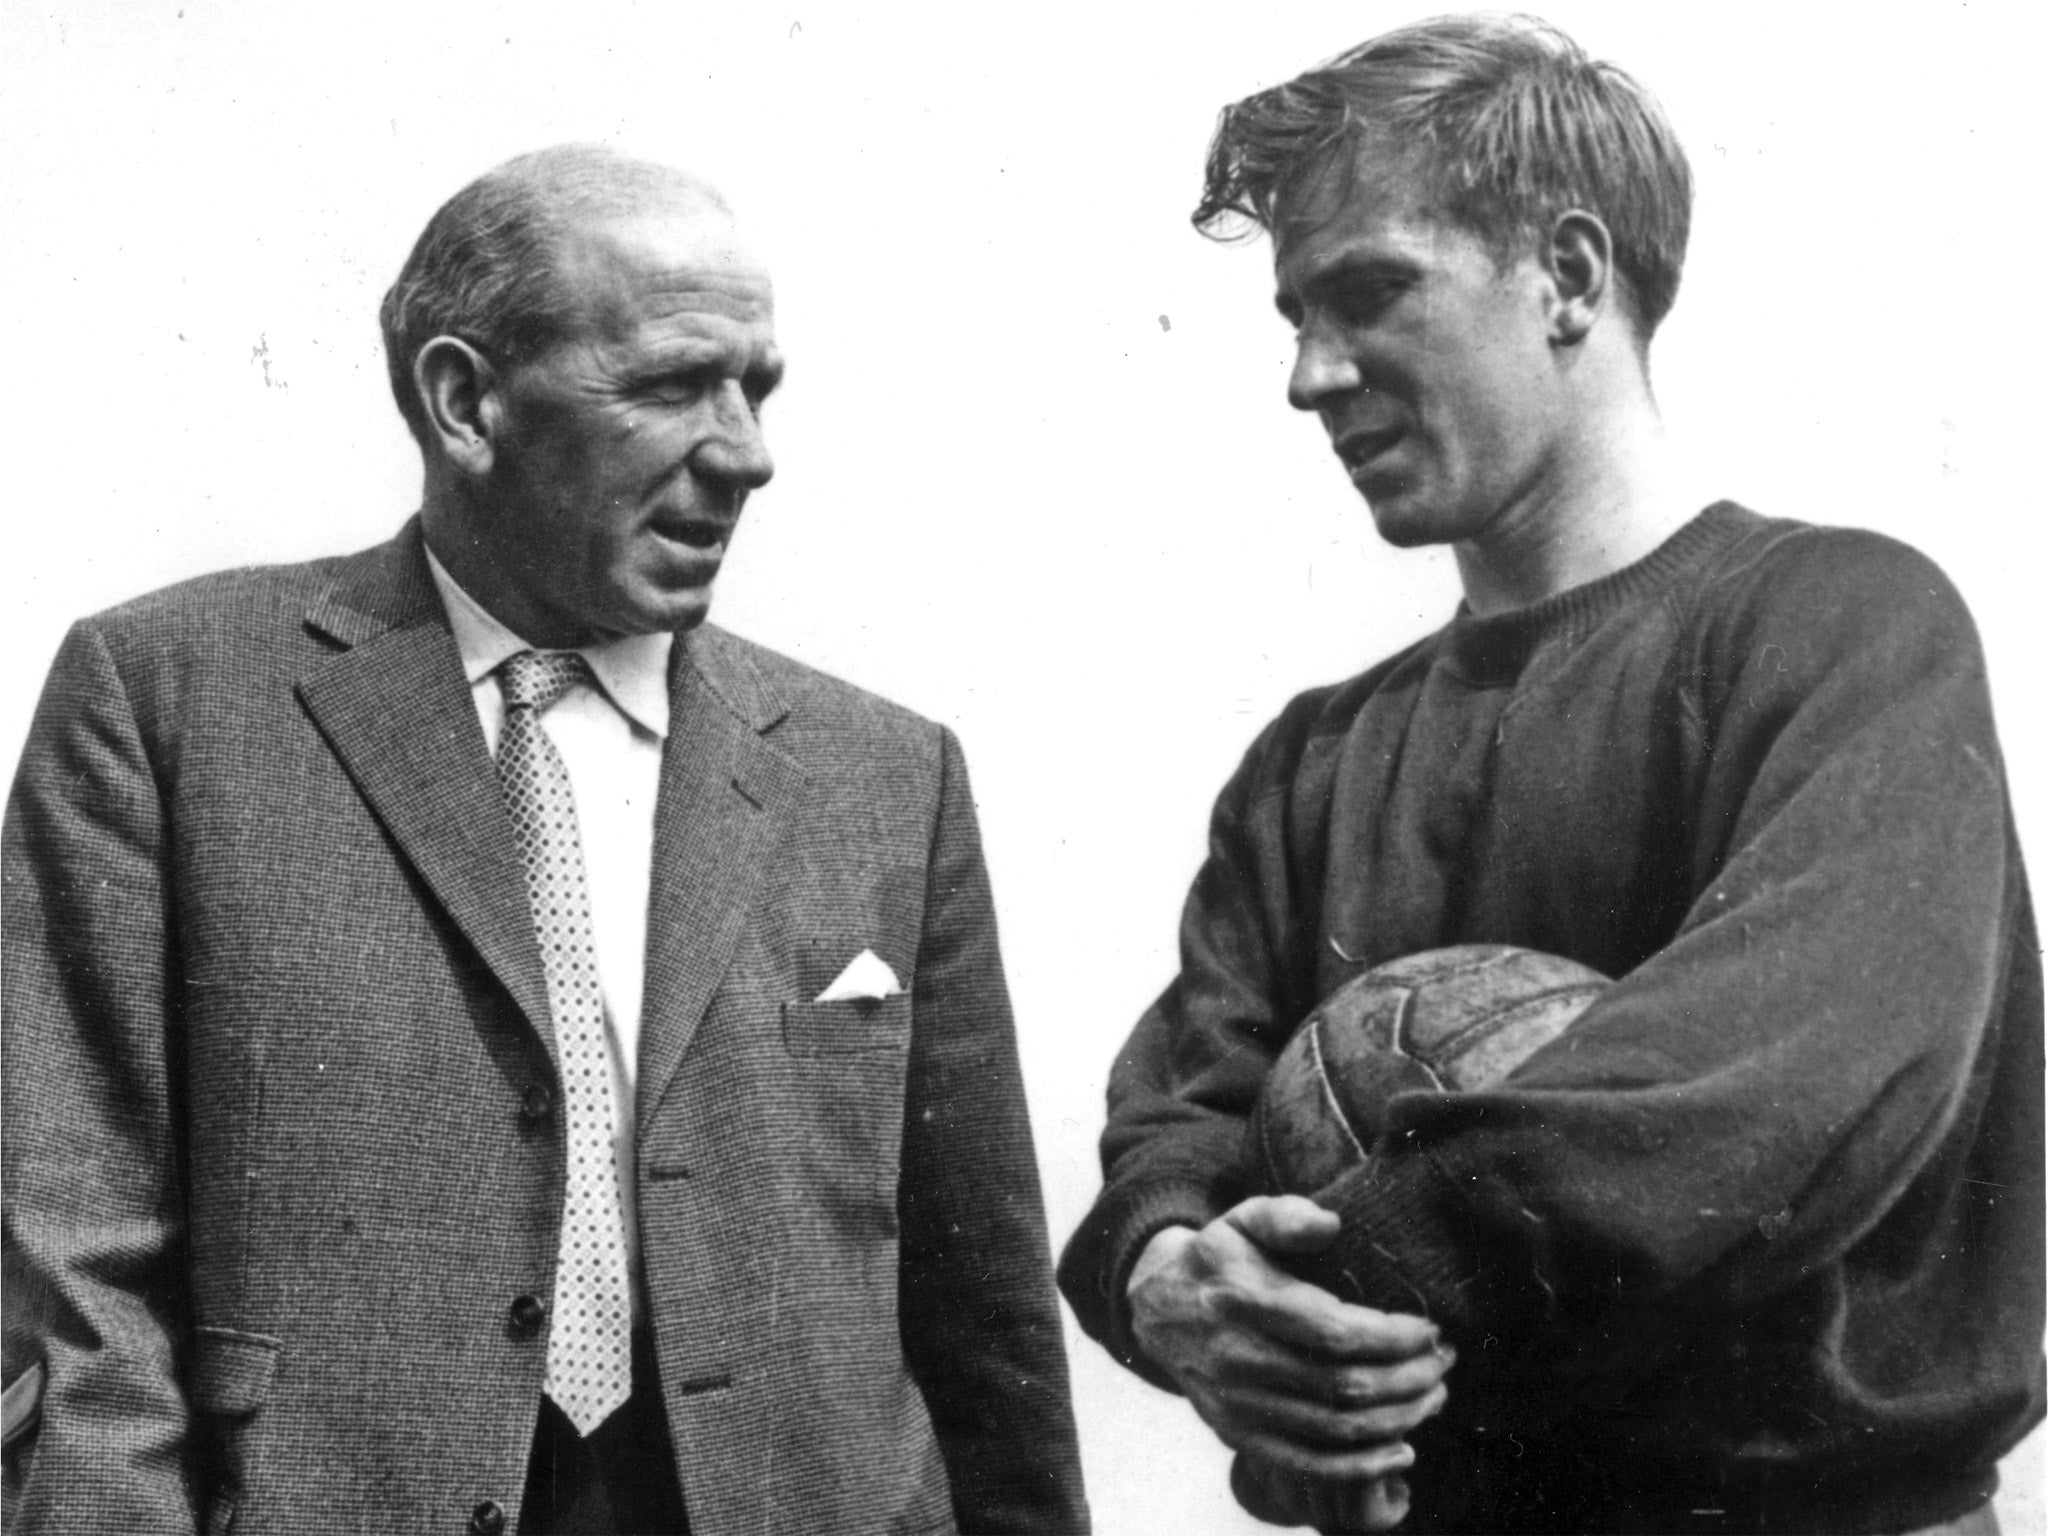 Matt Busby with Bobby Charlton shortly after the crash in 1958